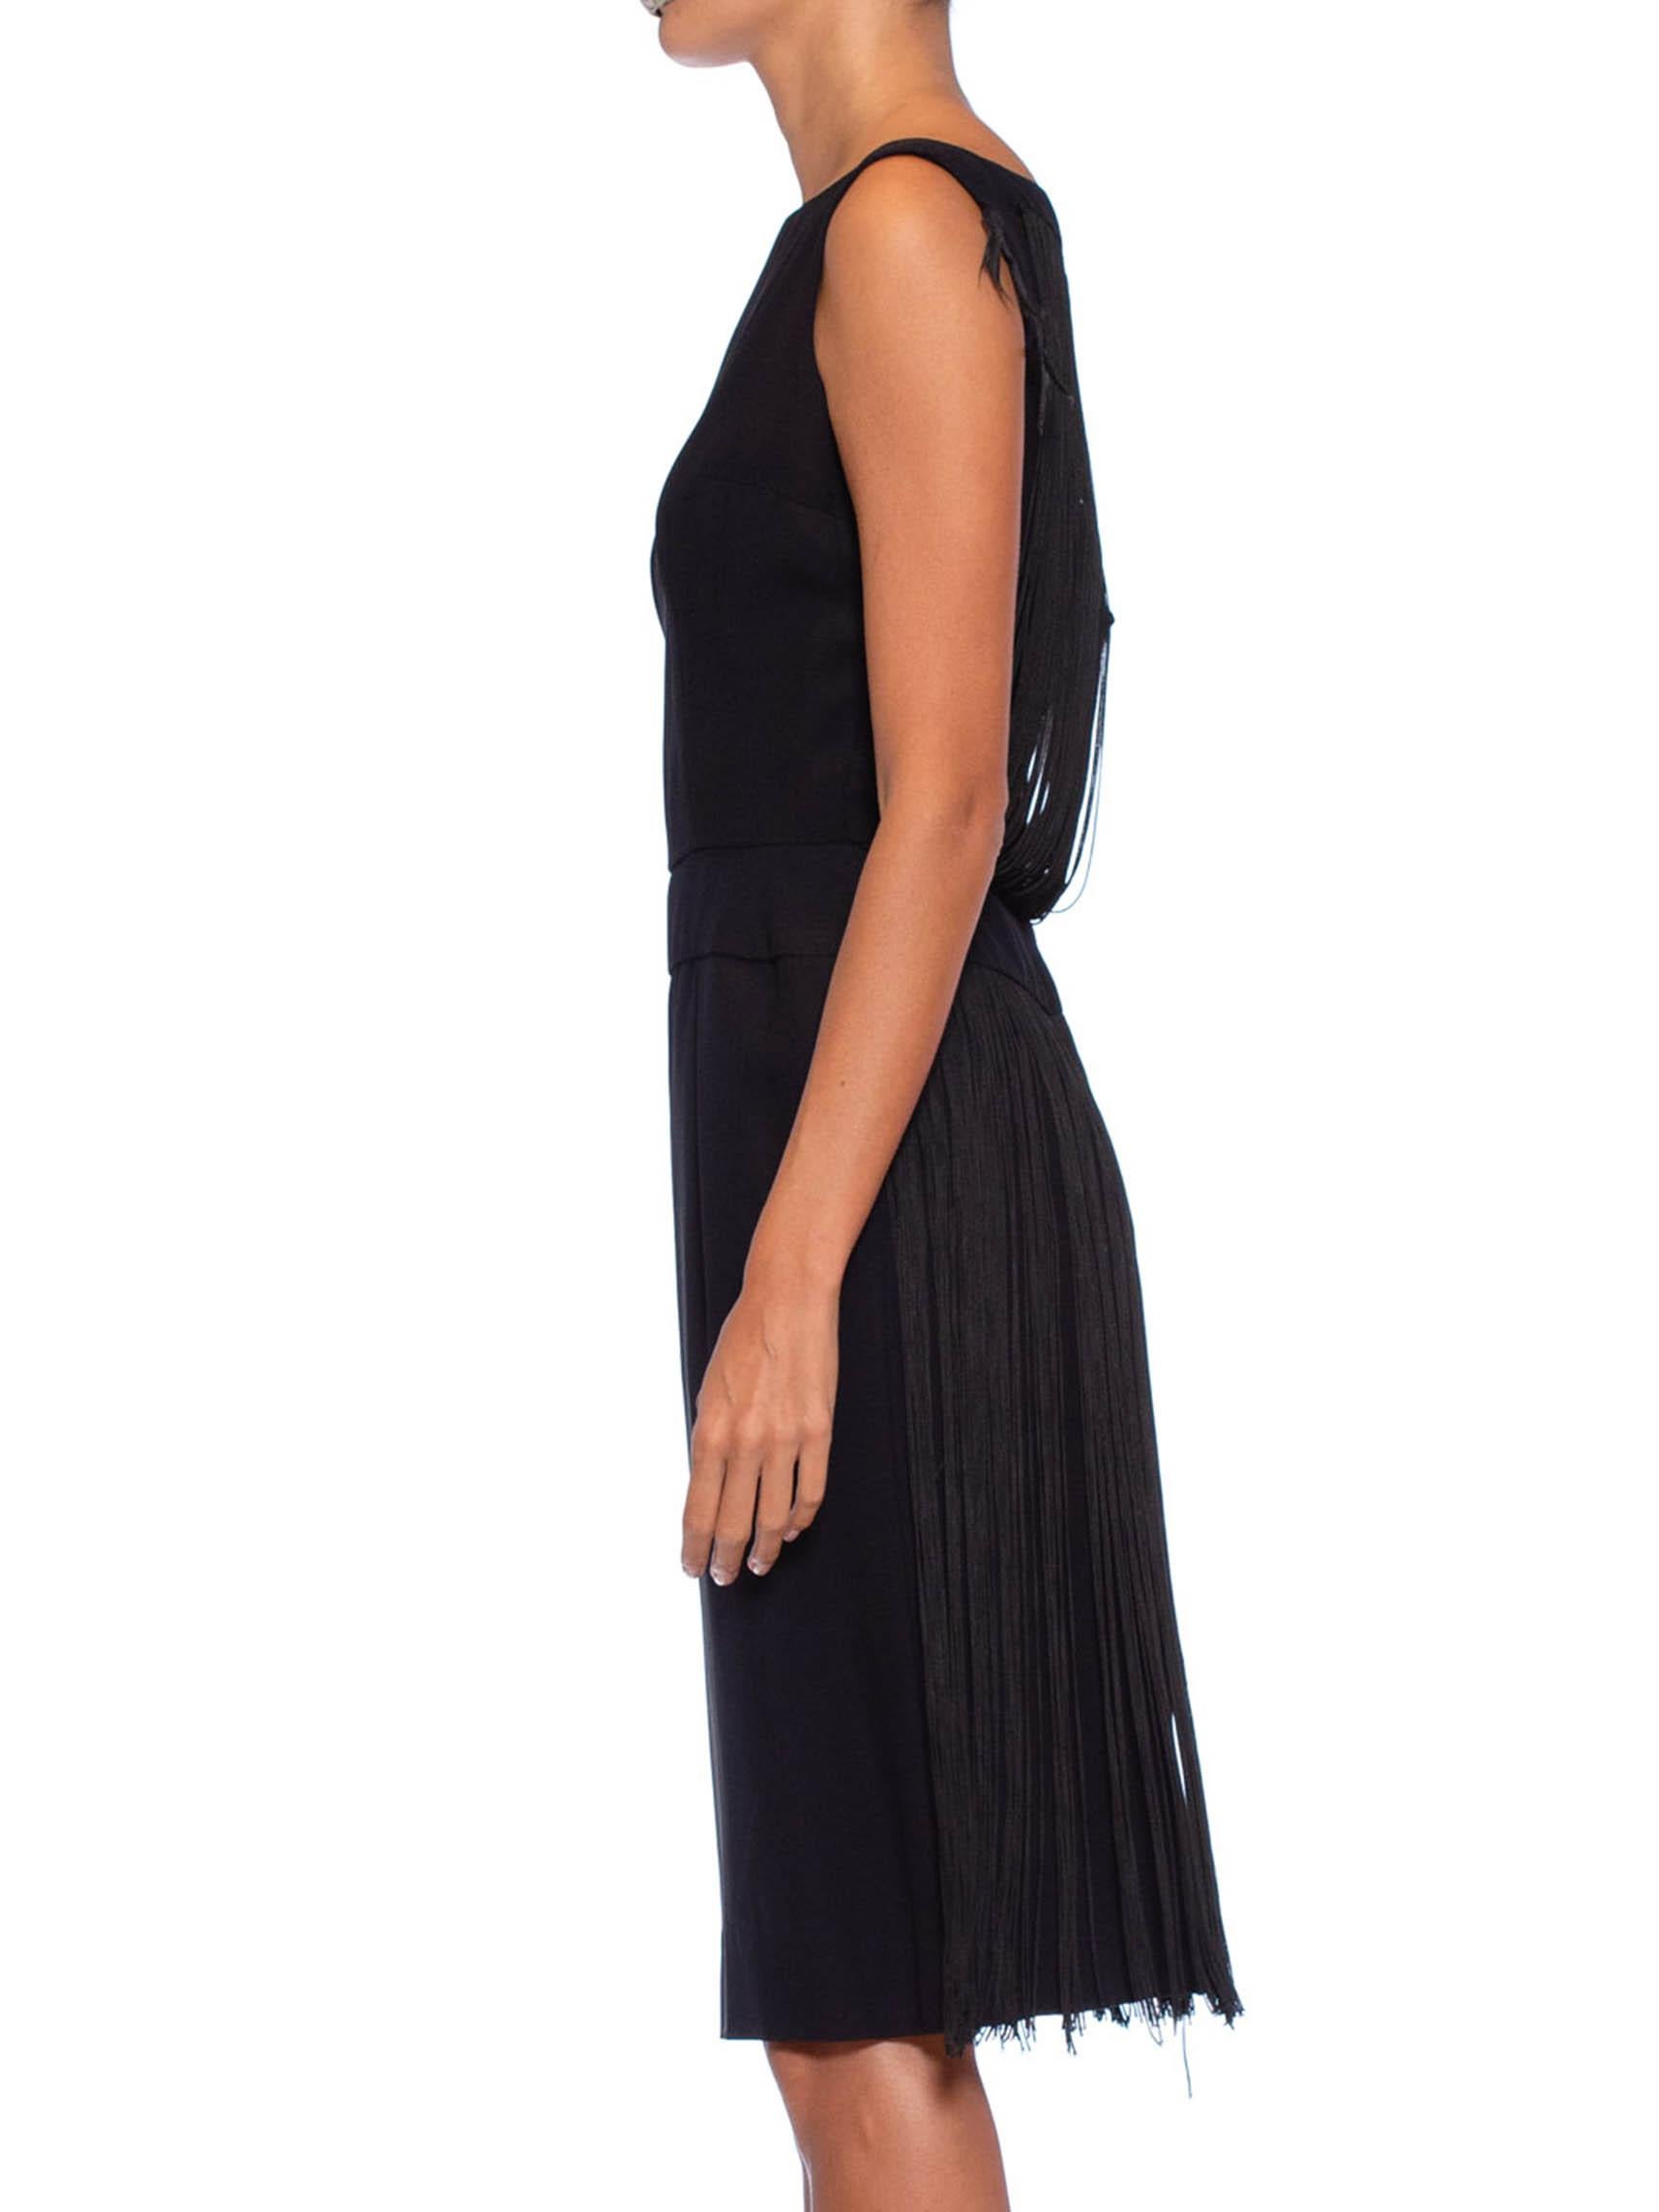 Women's 1960S Black Rayon Crepe LBD Cocktail Dress With Draped Long Fringe Back For Sale